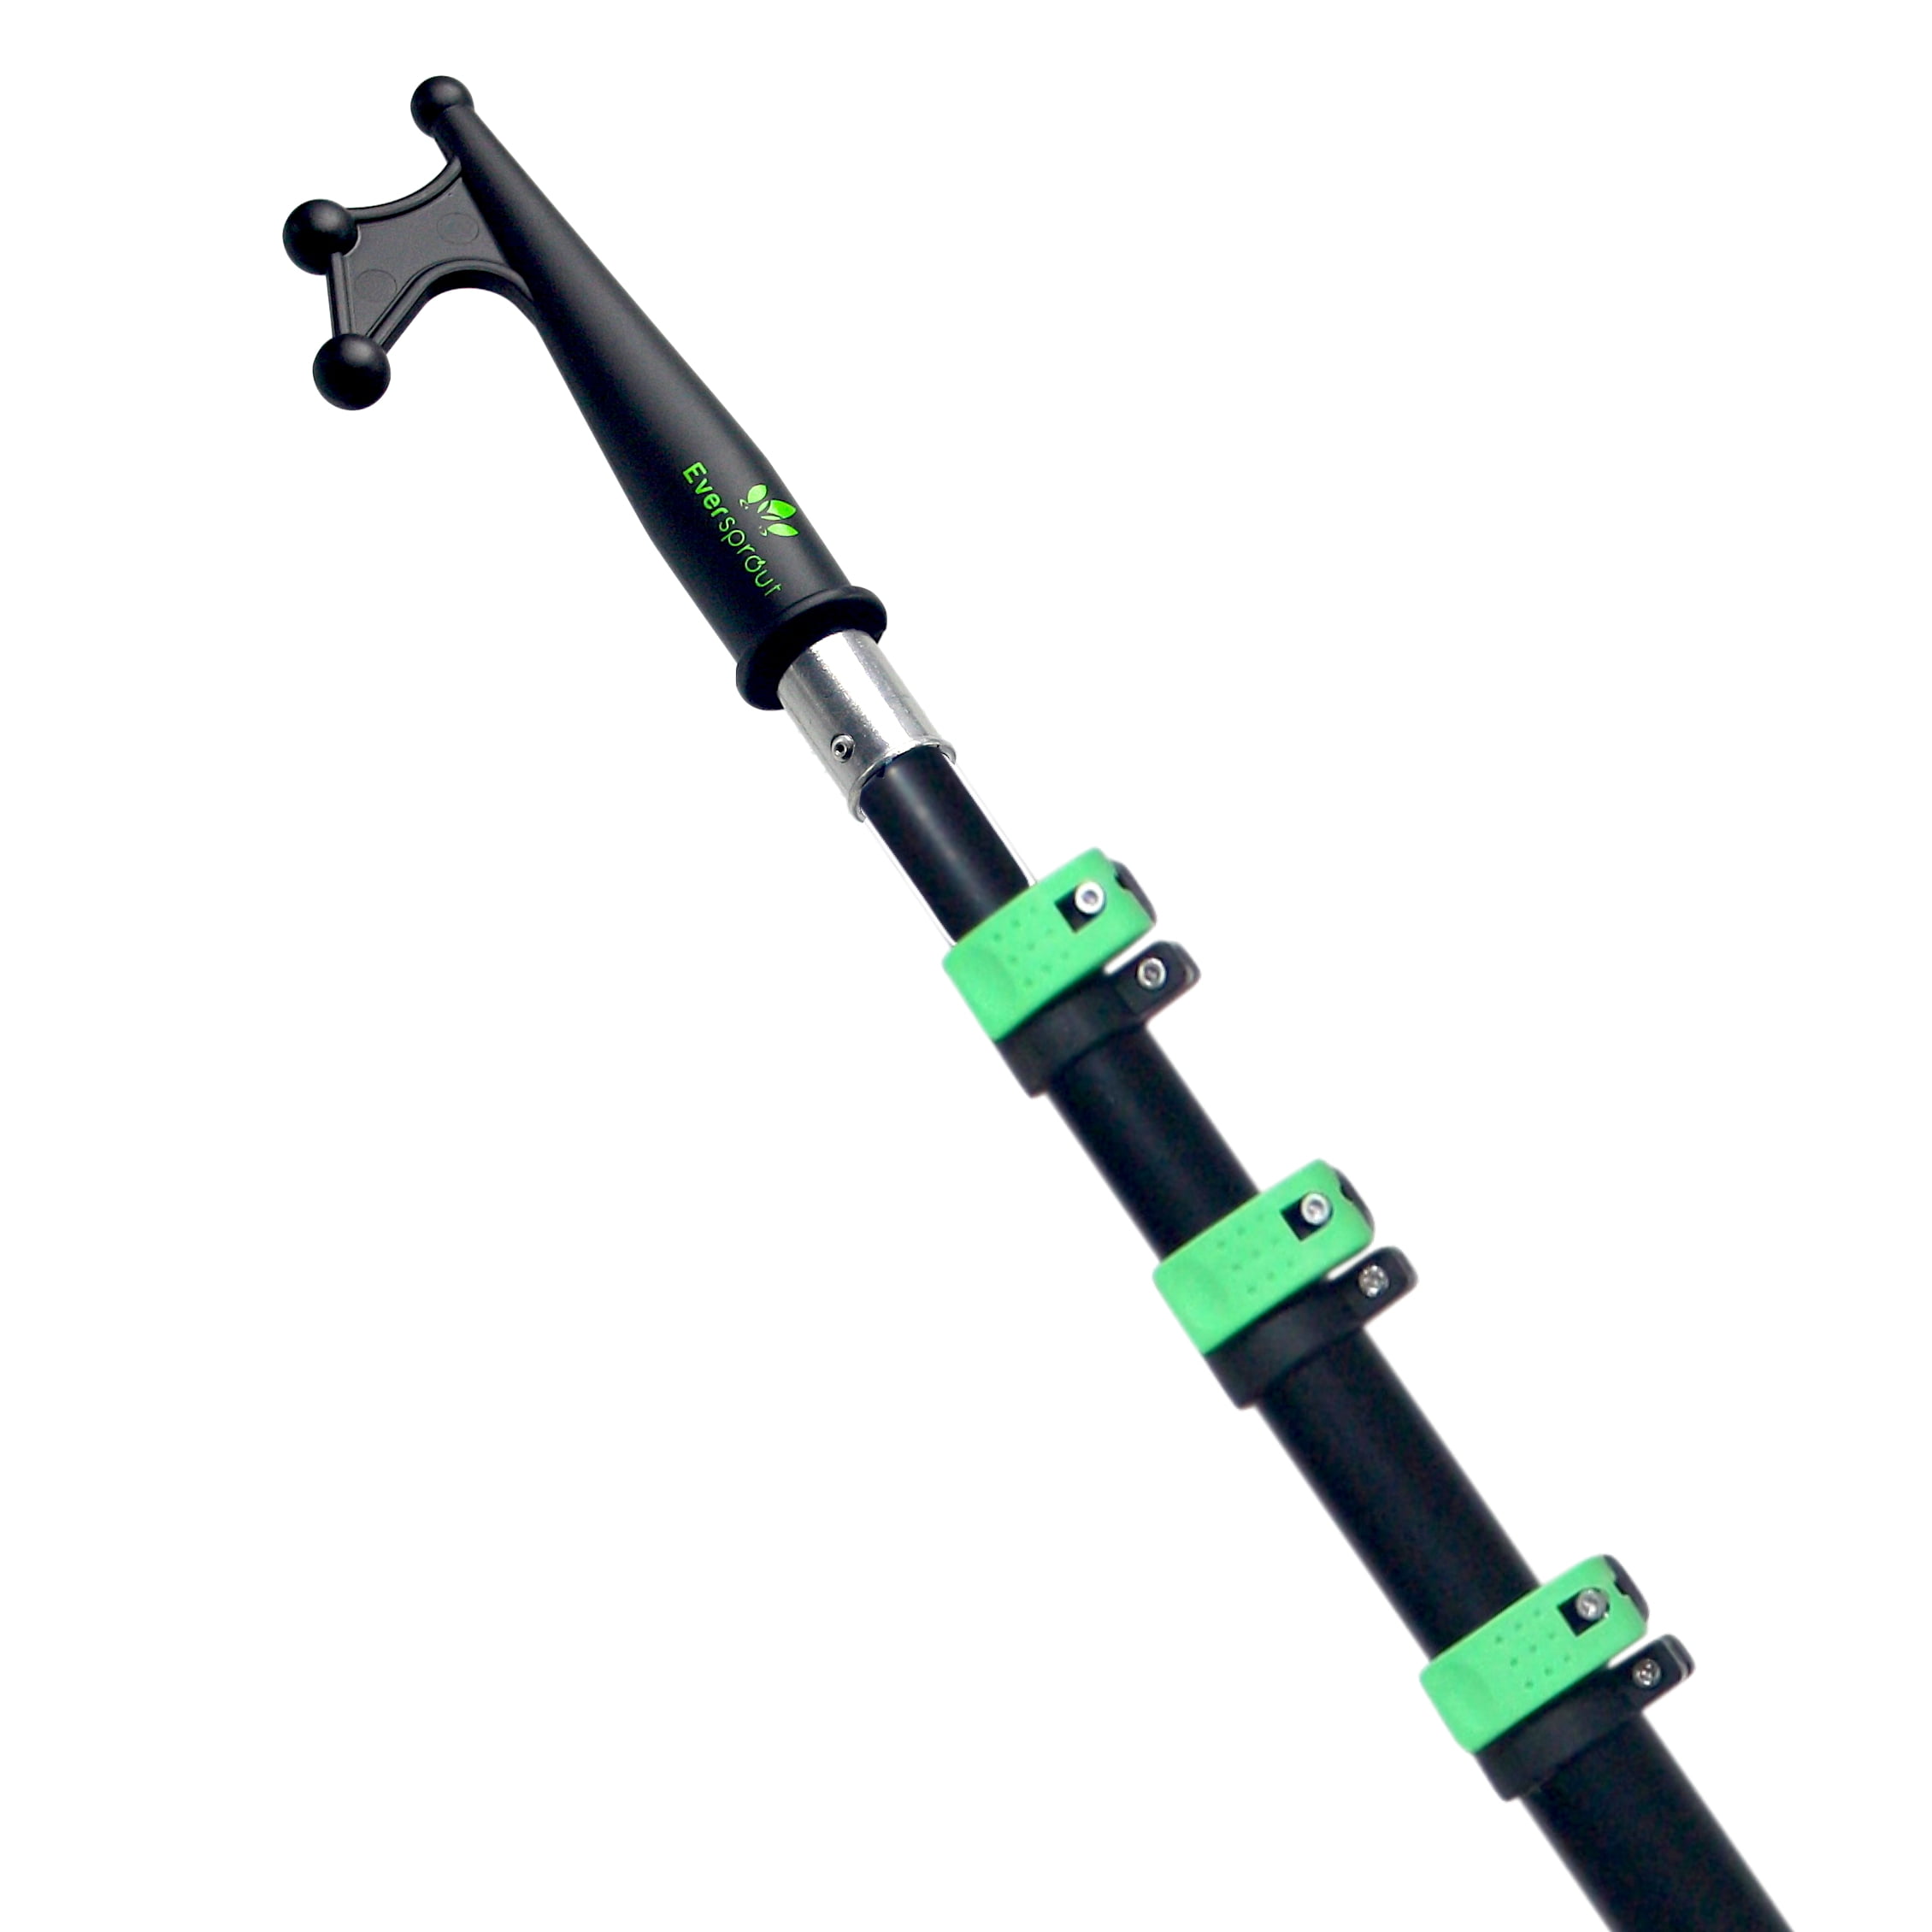 EVERSPROUT Telescoping Boat Hook, Floats, Scratch-Resistant, Sturdy-No Pole  NEW